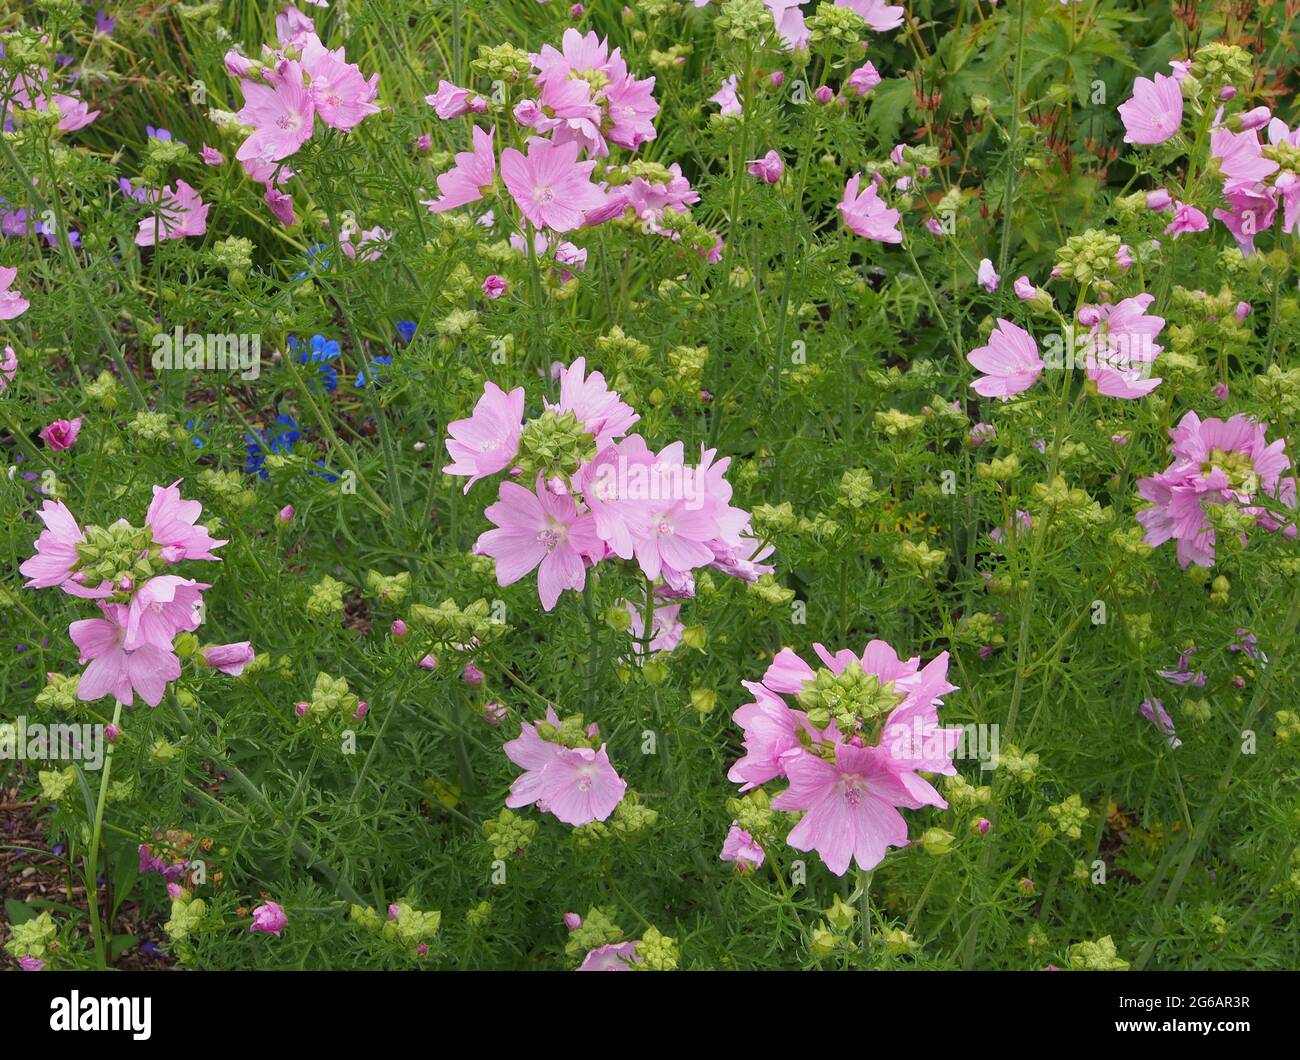 Mass of bright pink mallow flowers growing on the shrub in an English garden in July. Stock Photo